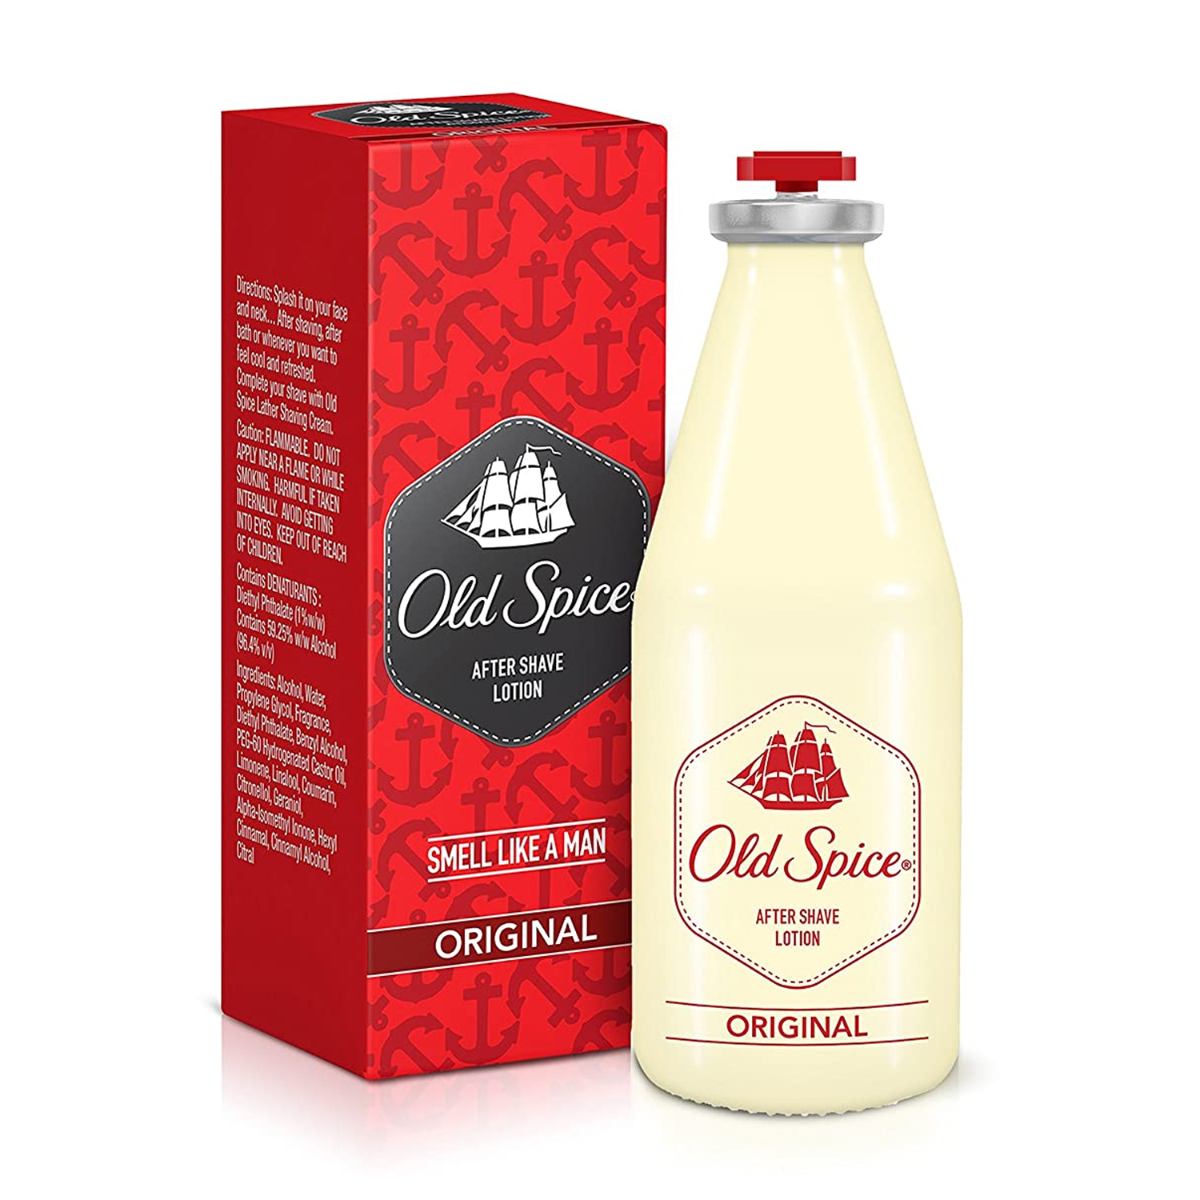 Old Spice Original After Shave Lotion, 50ml